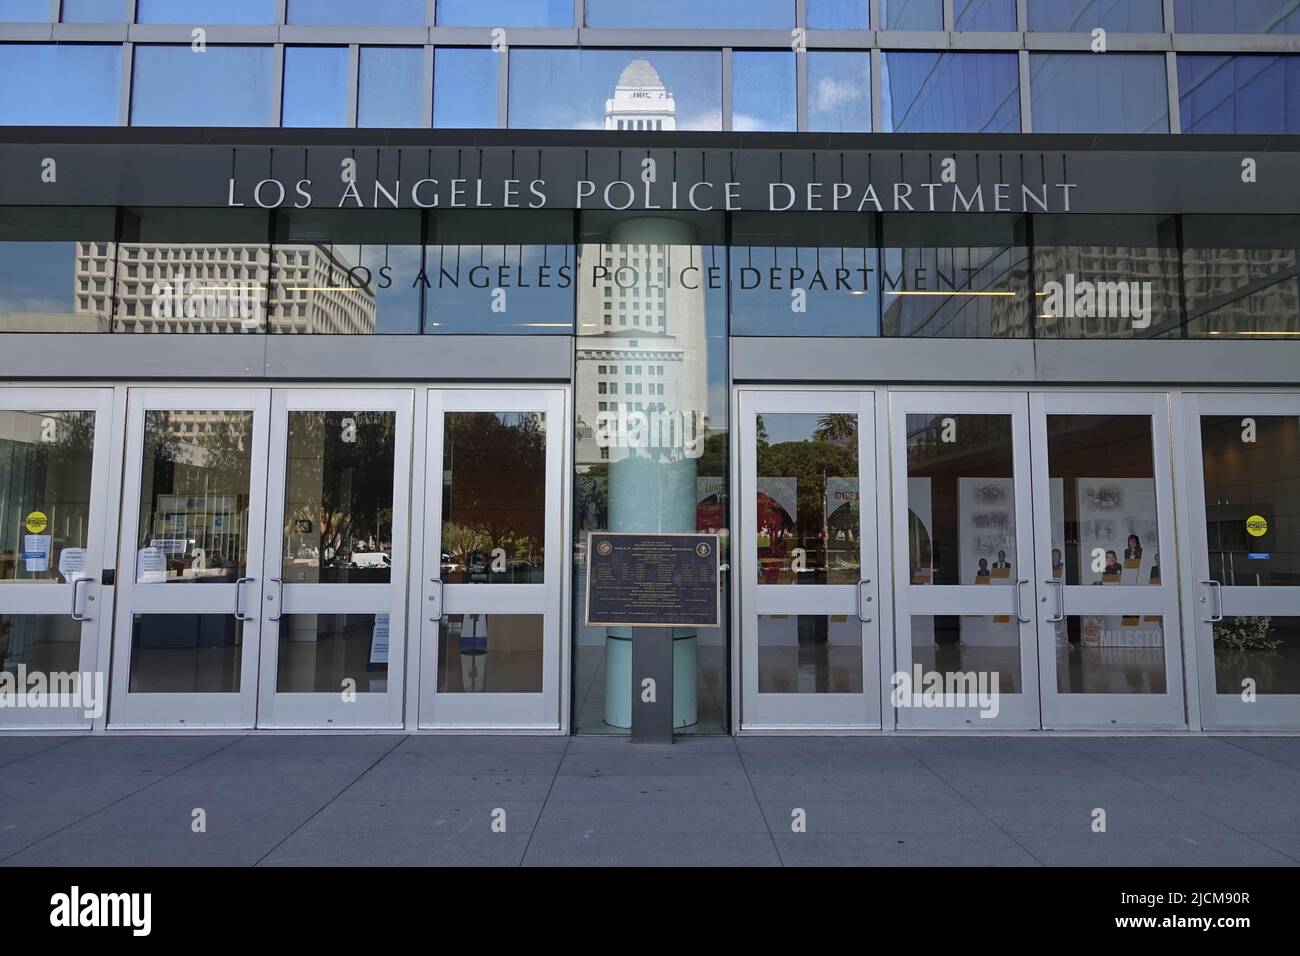 Los Angeles, CA / USA - May 14, 2022: The main entrance for the L.A. Police Department LAPD headquarters building is shown in downtown during the day. Stock Photo